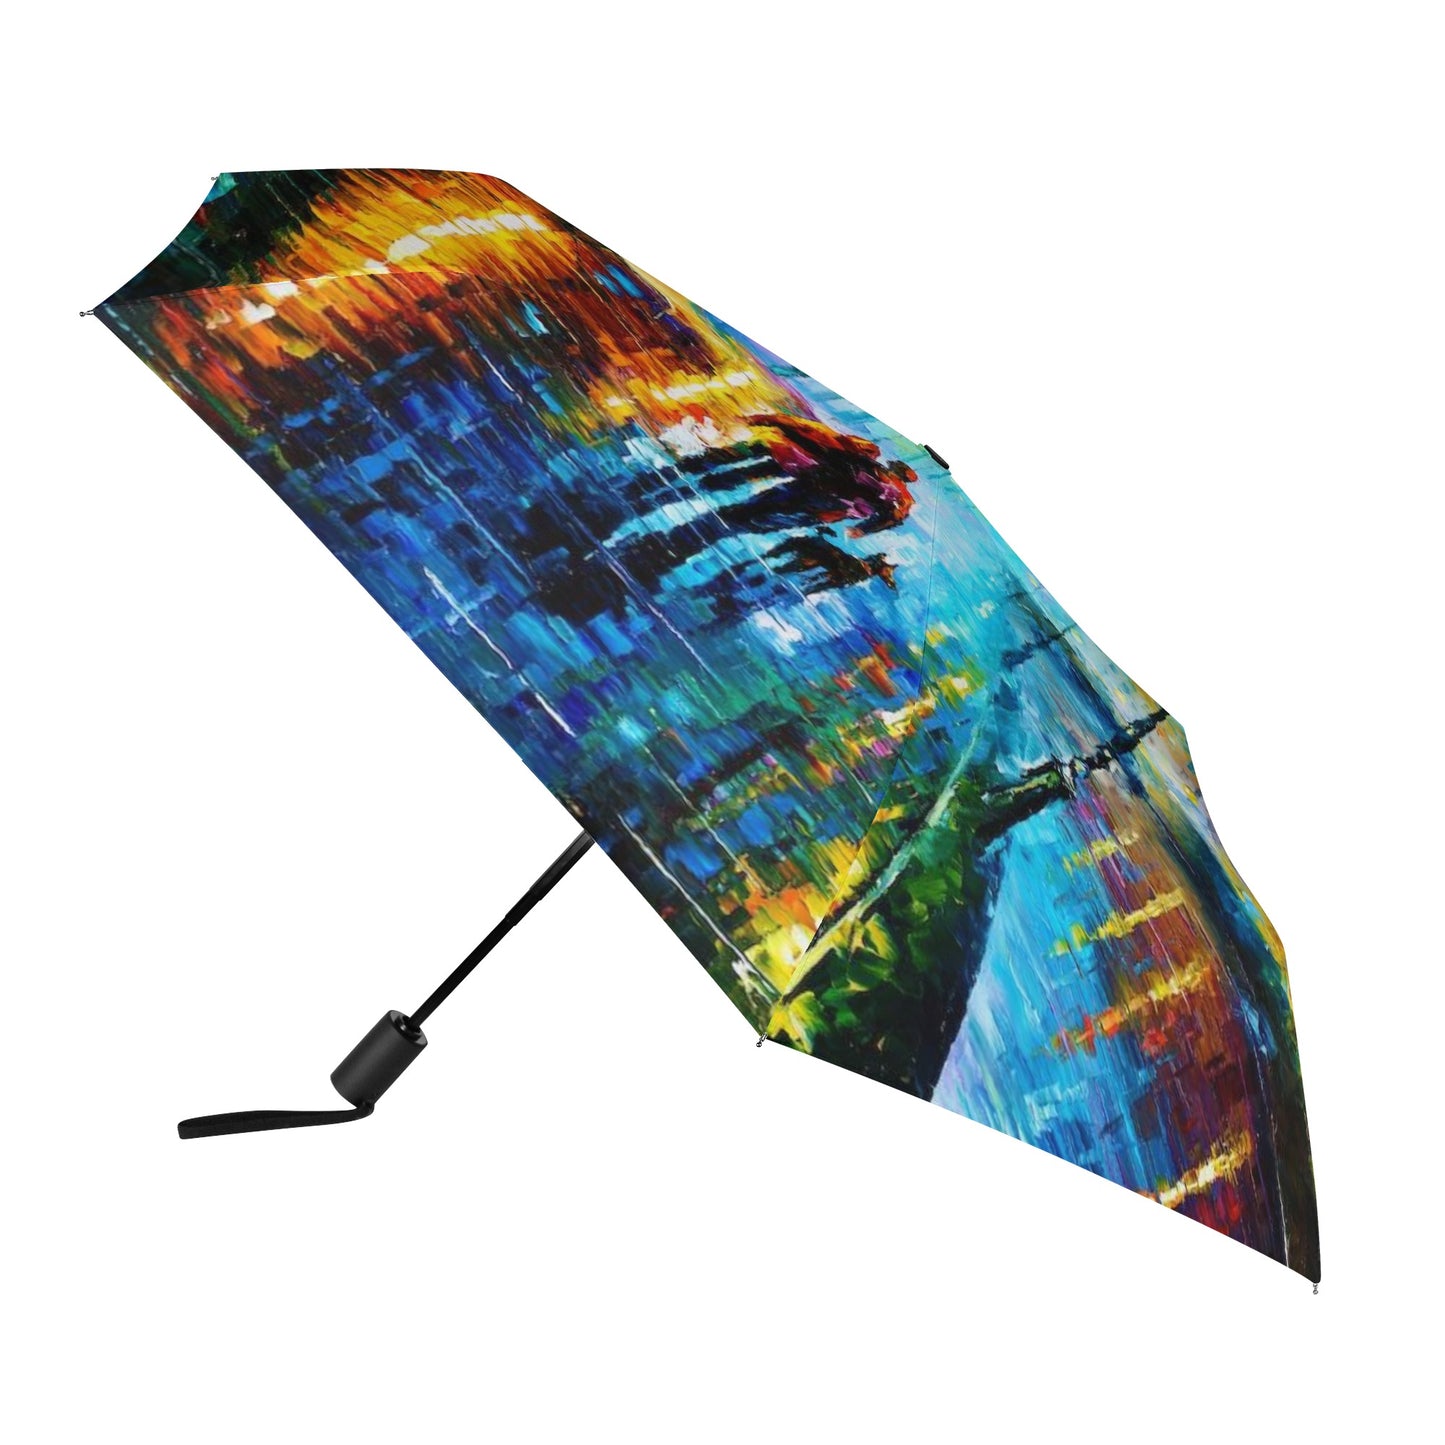 Fully Auto Open & Close Umbrella Printing Outside Afremov MELODY OF THE NIGHT